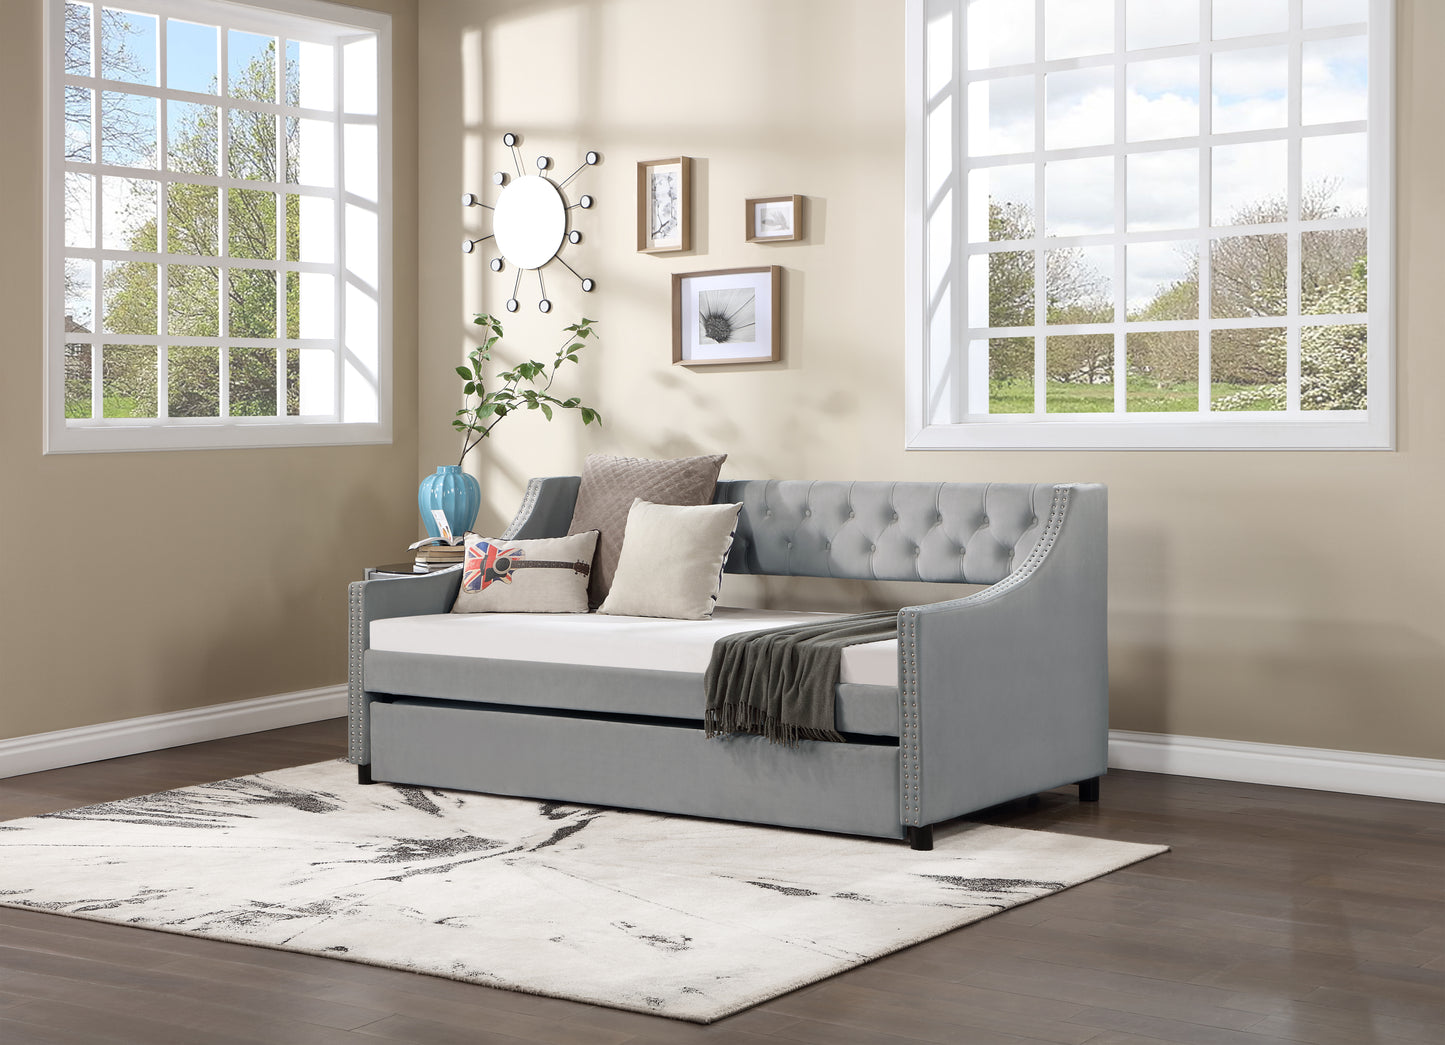 Button Gray Daybed with Trundle (Full)